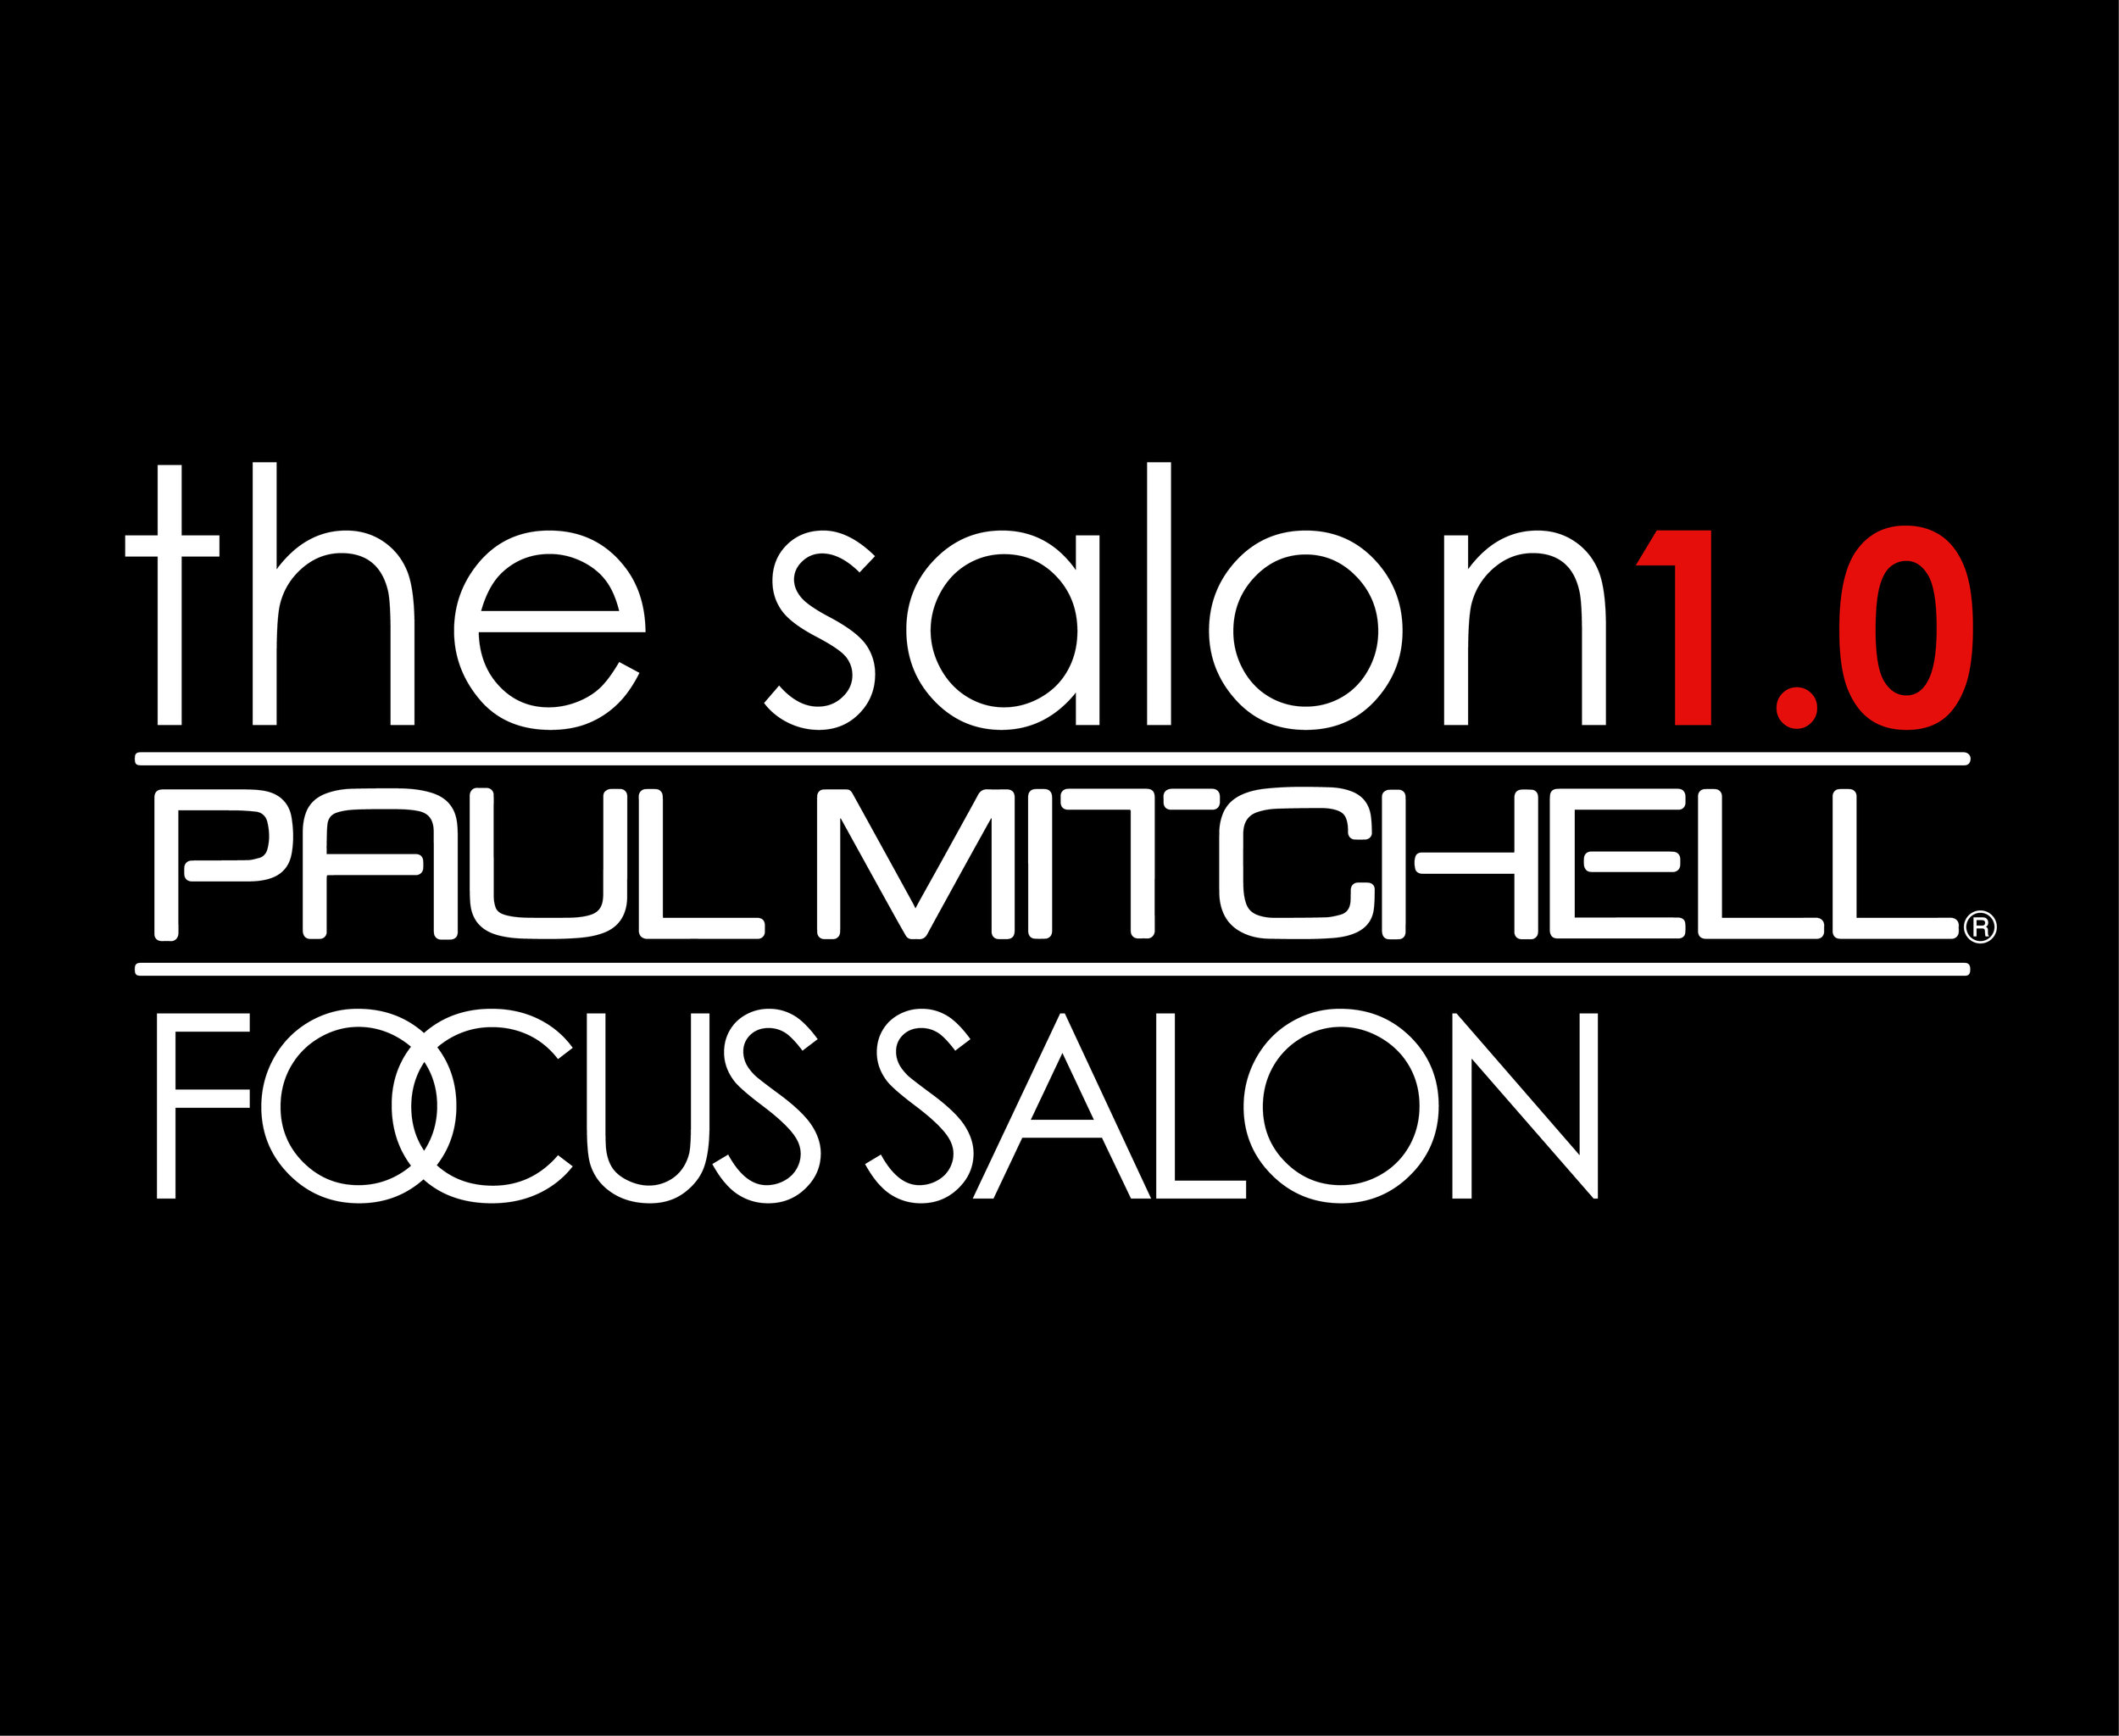 PROMOS  great deals on Paul Mitchell products, tools, and salon Gift Cards  — The salon 1.0 - Paul Mitchell Focus Salon